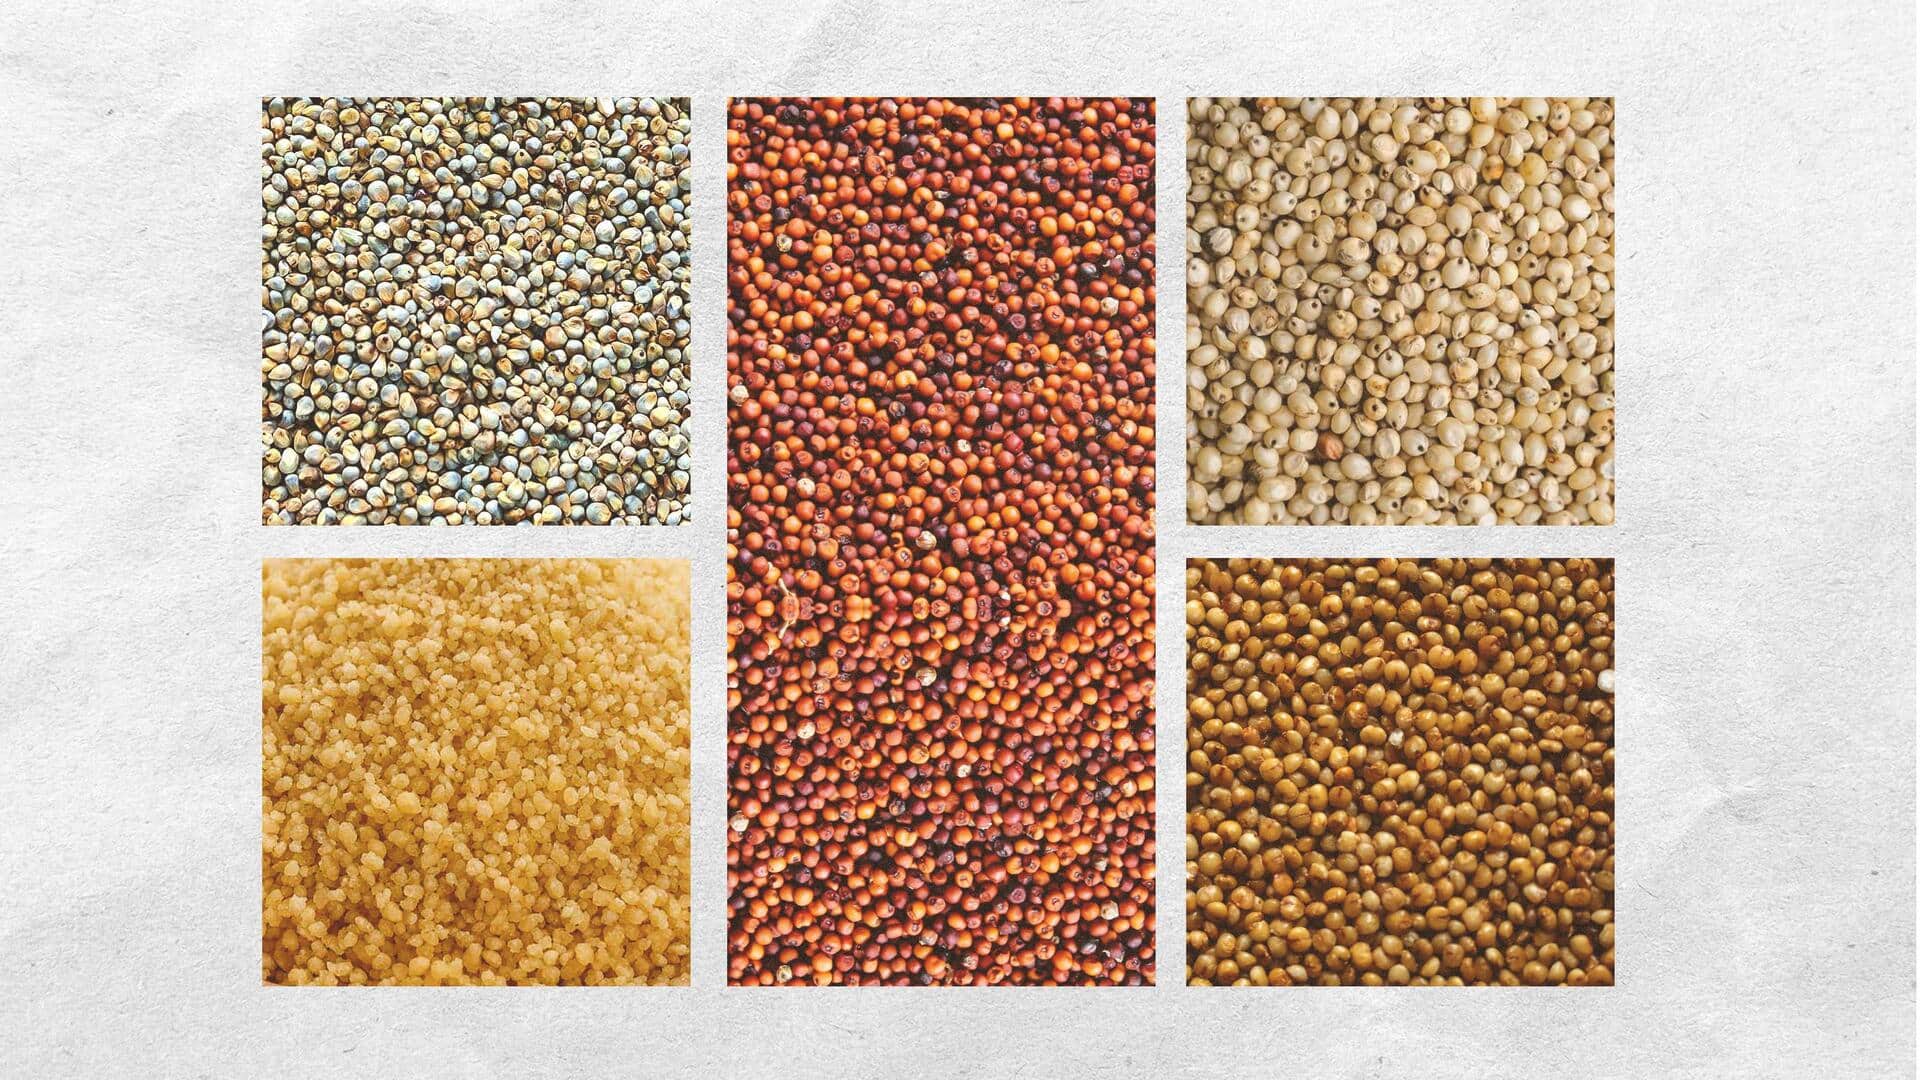 Delicious ways to enjoy these 5 millet varieties